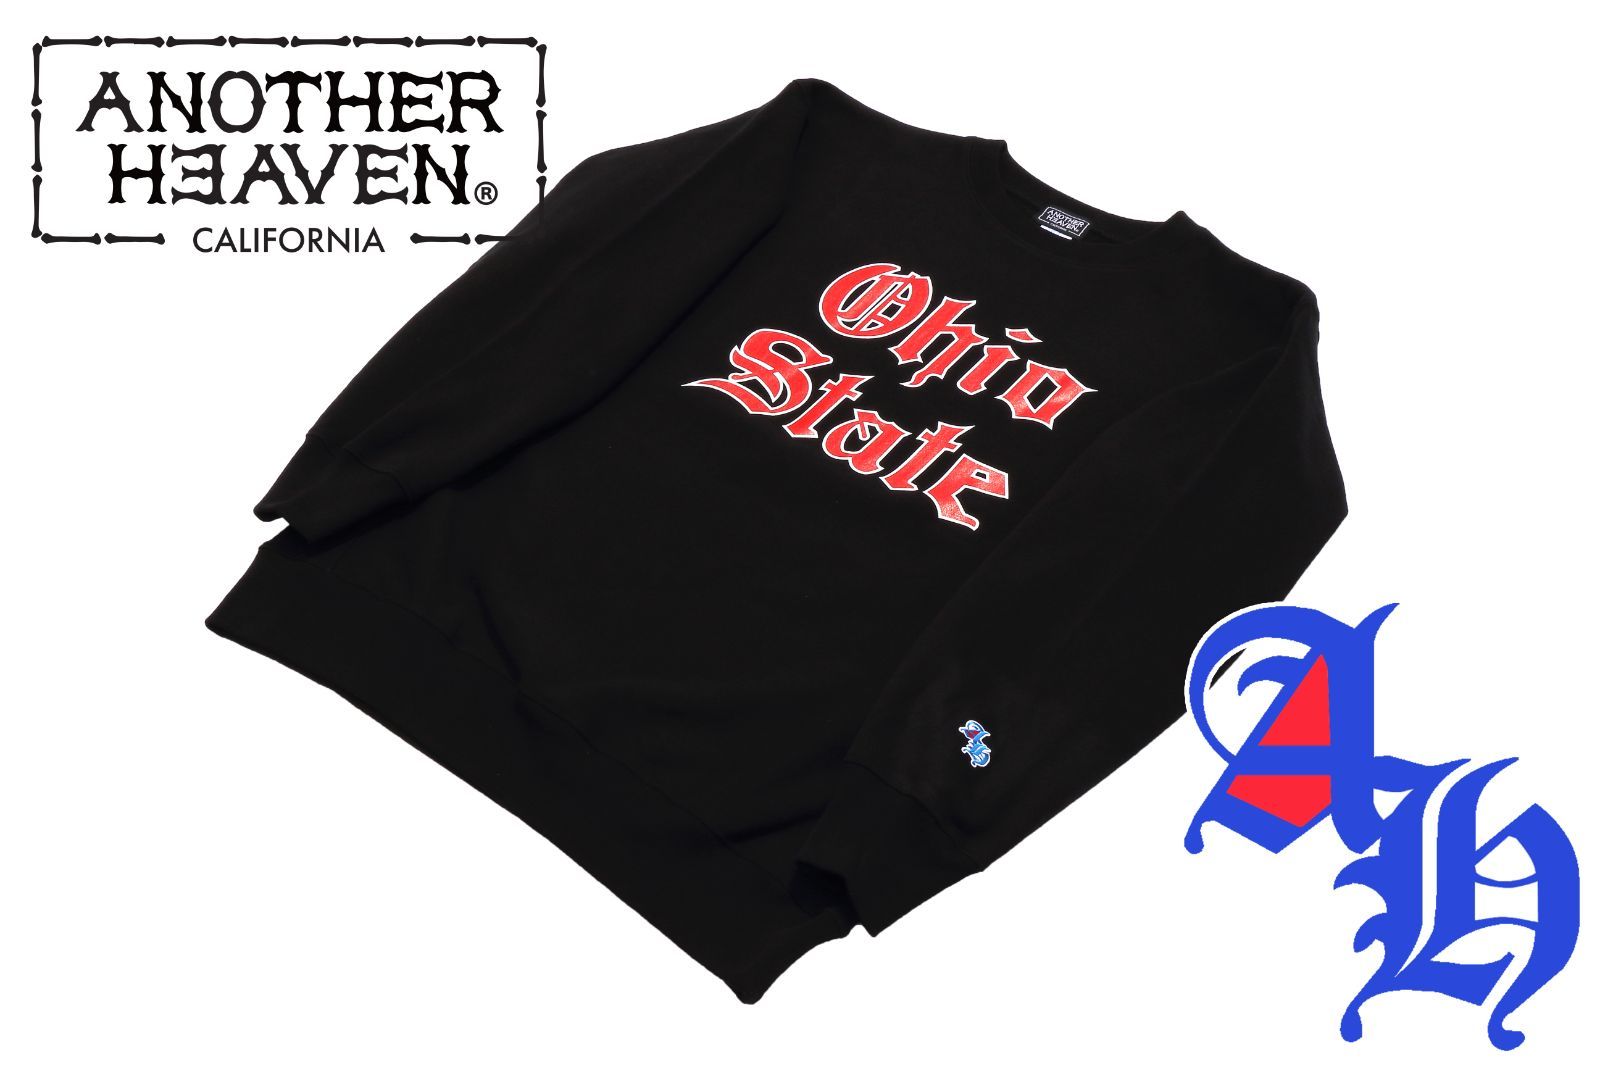 80s Heavyweight Ohio State Logo Another Heaven/アナザーヘブン新品